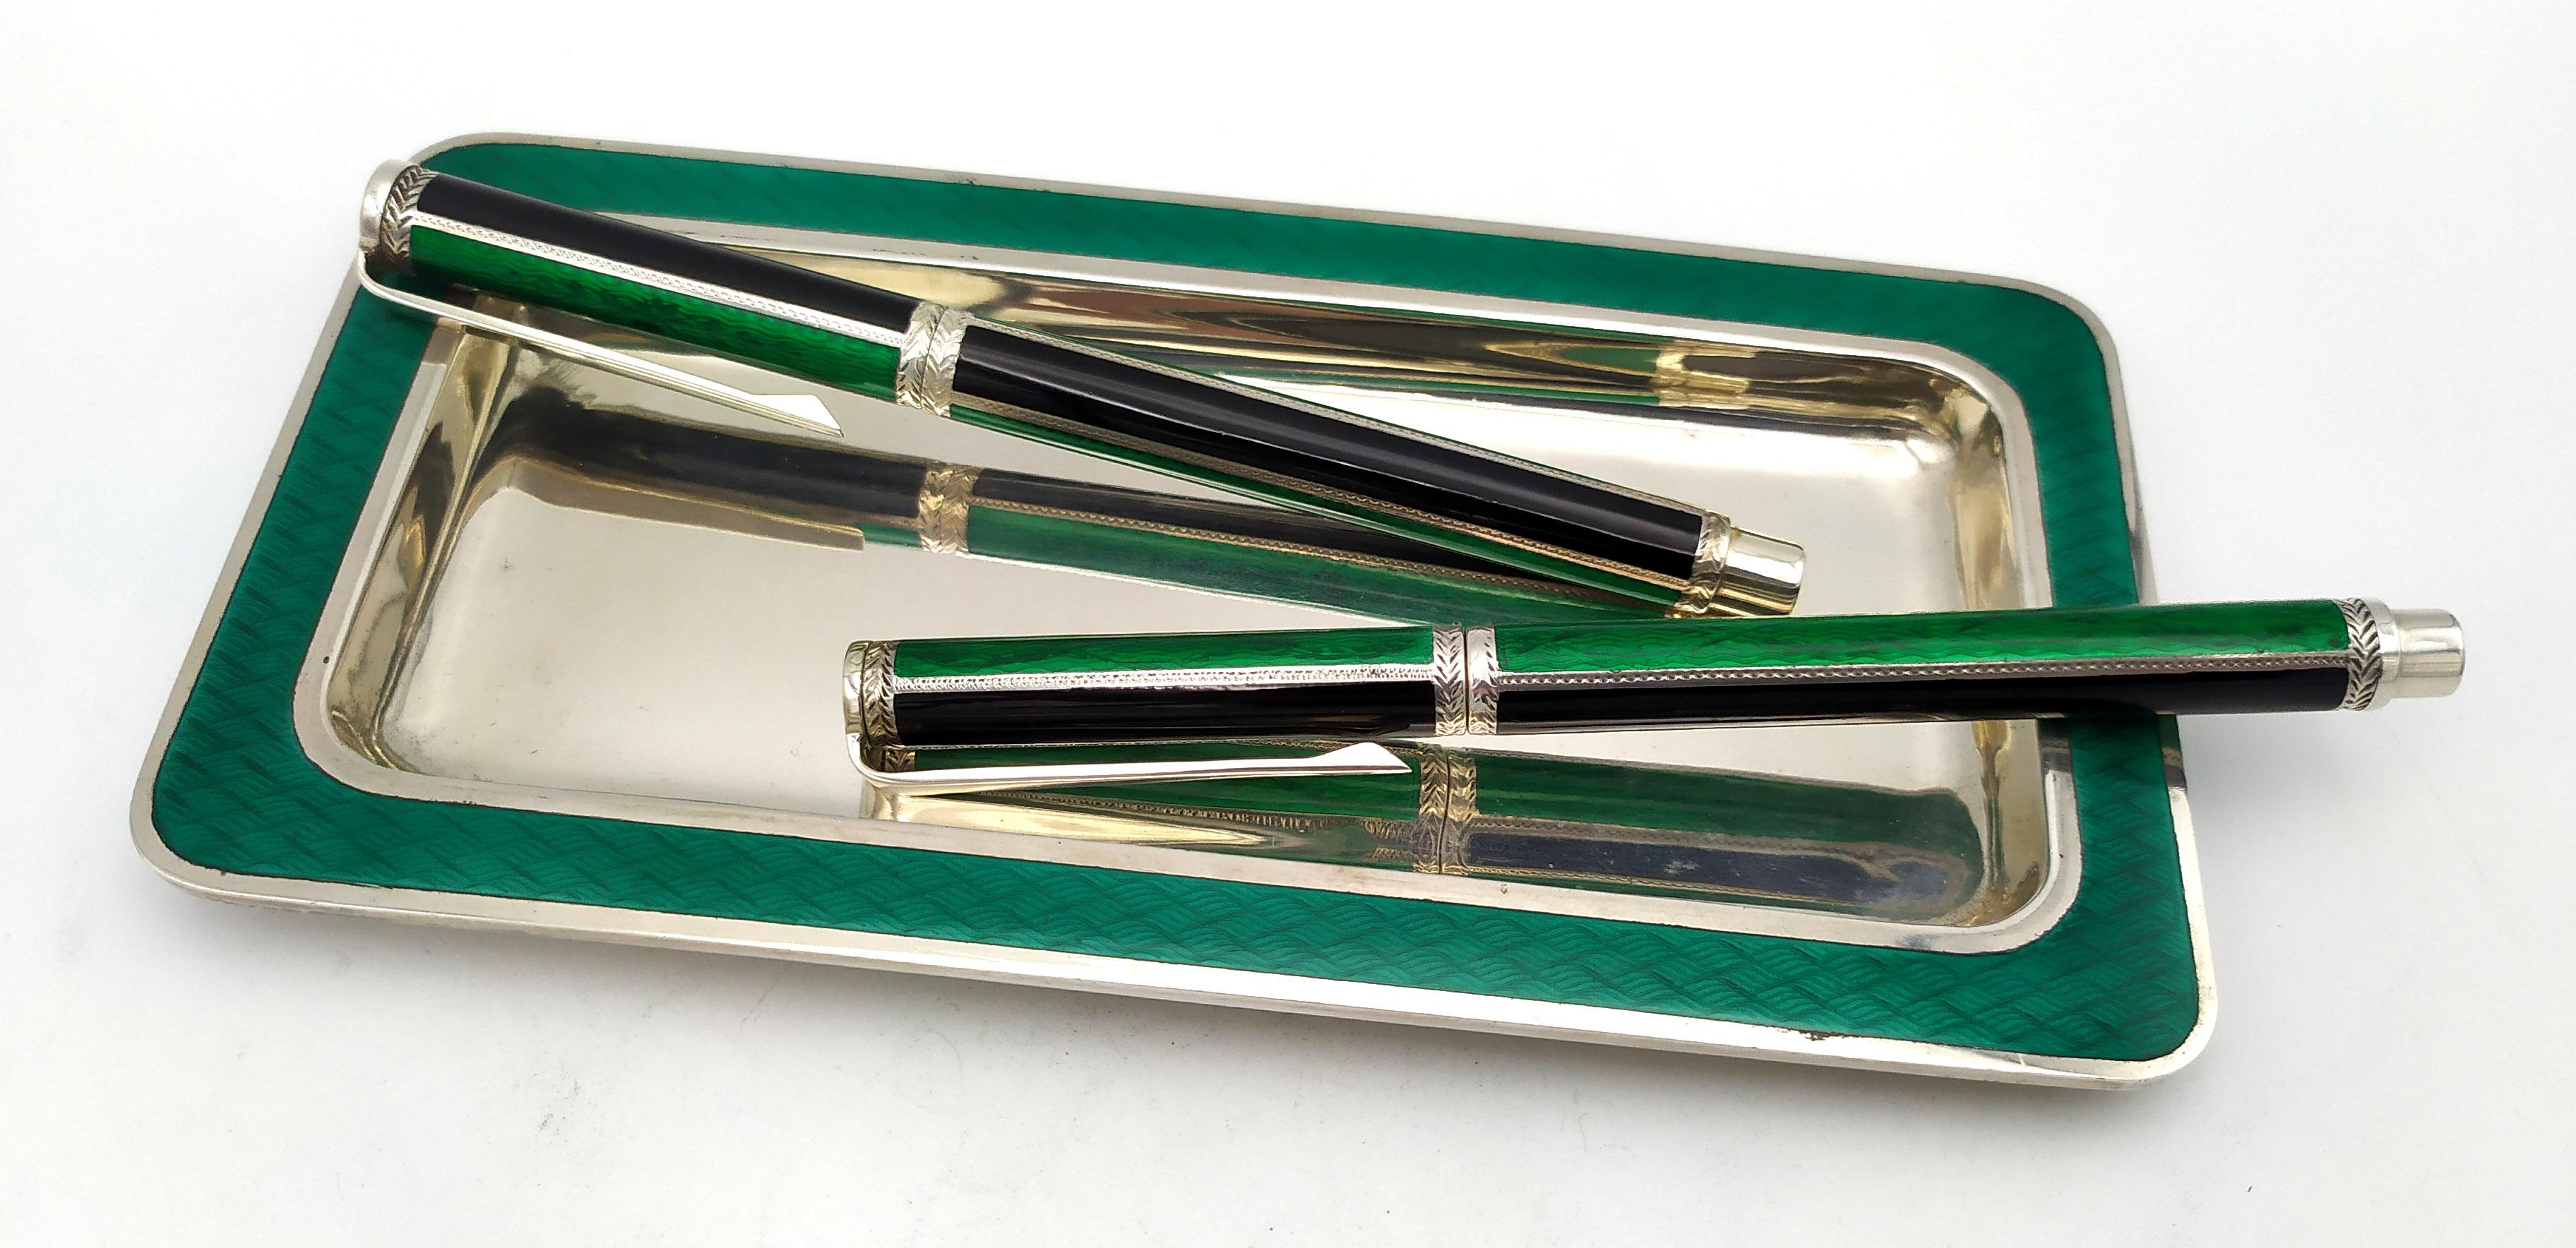 Hand-Painted Fountain pen, Ballpoint pen and tray for a Desk Set green enamel Salimbeni  For Sale